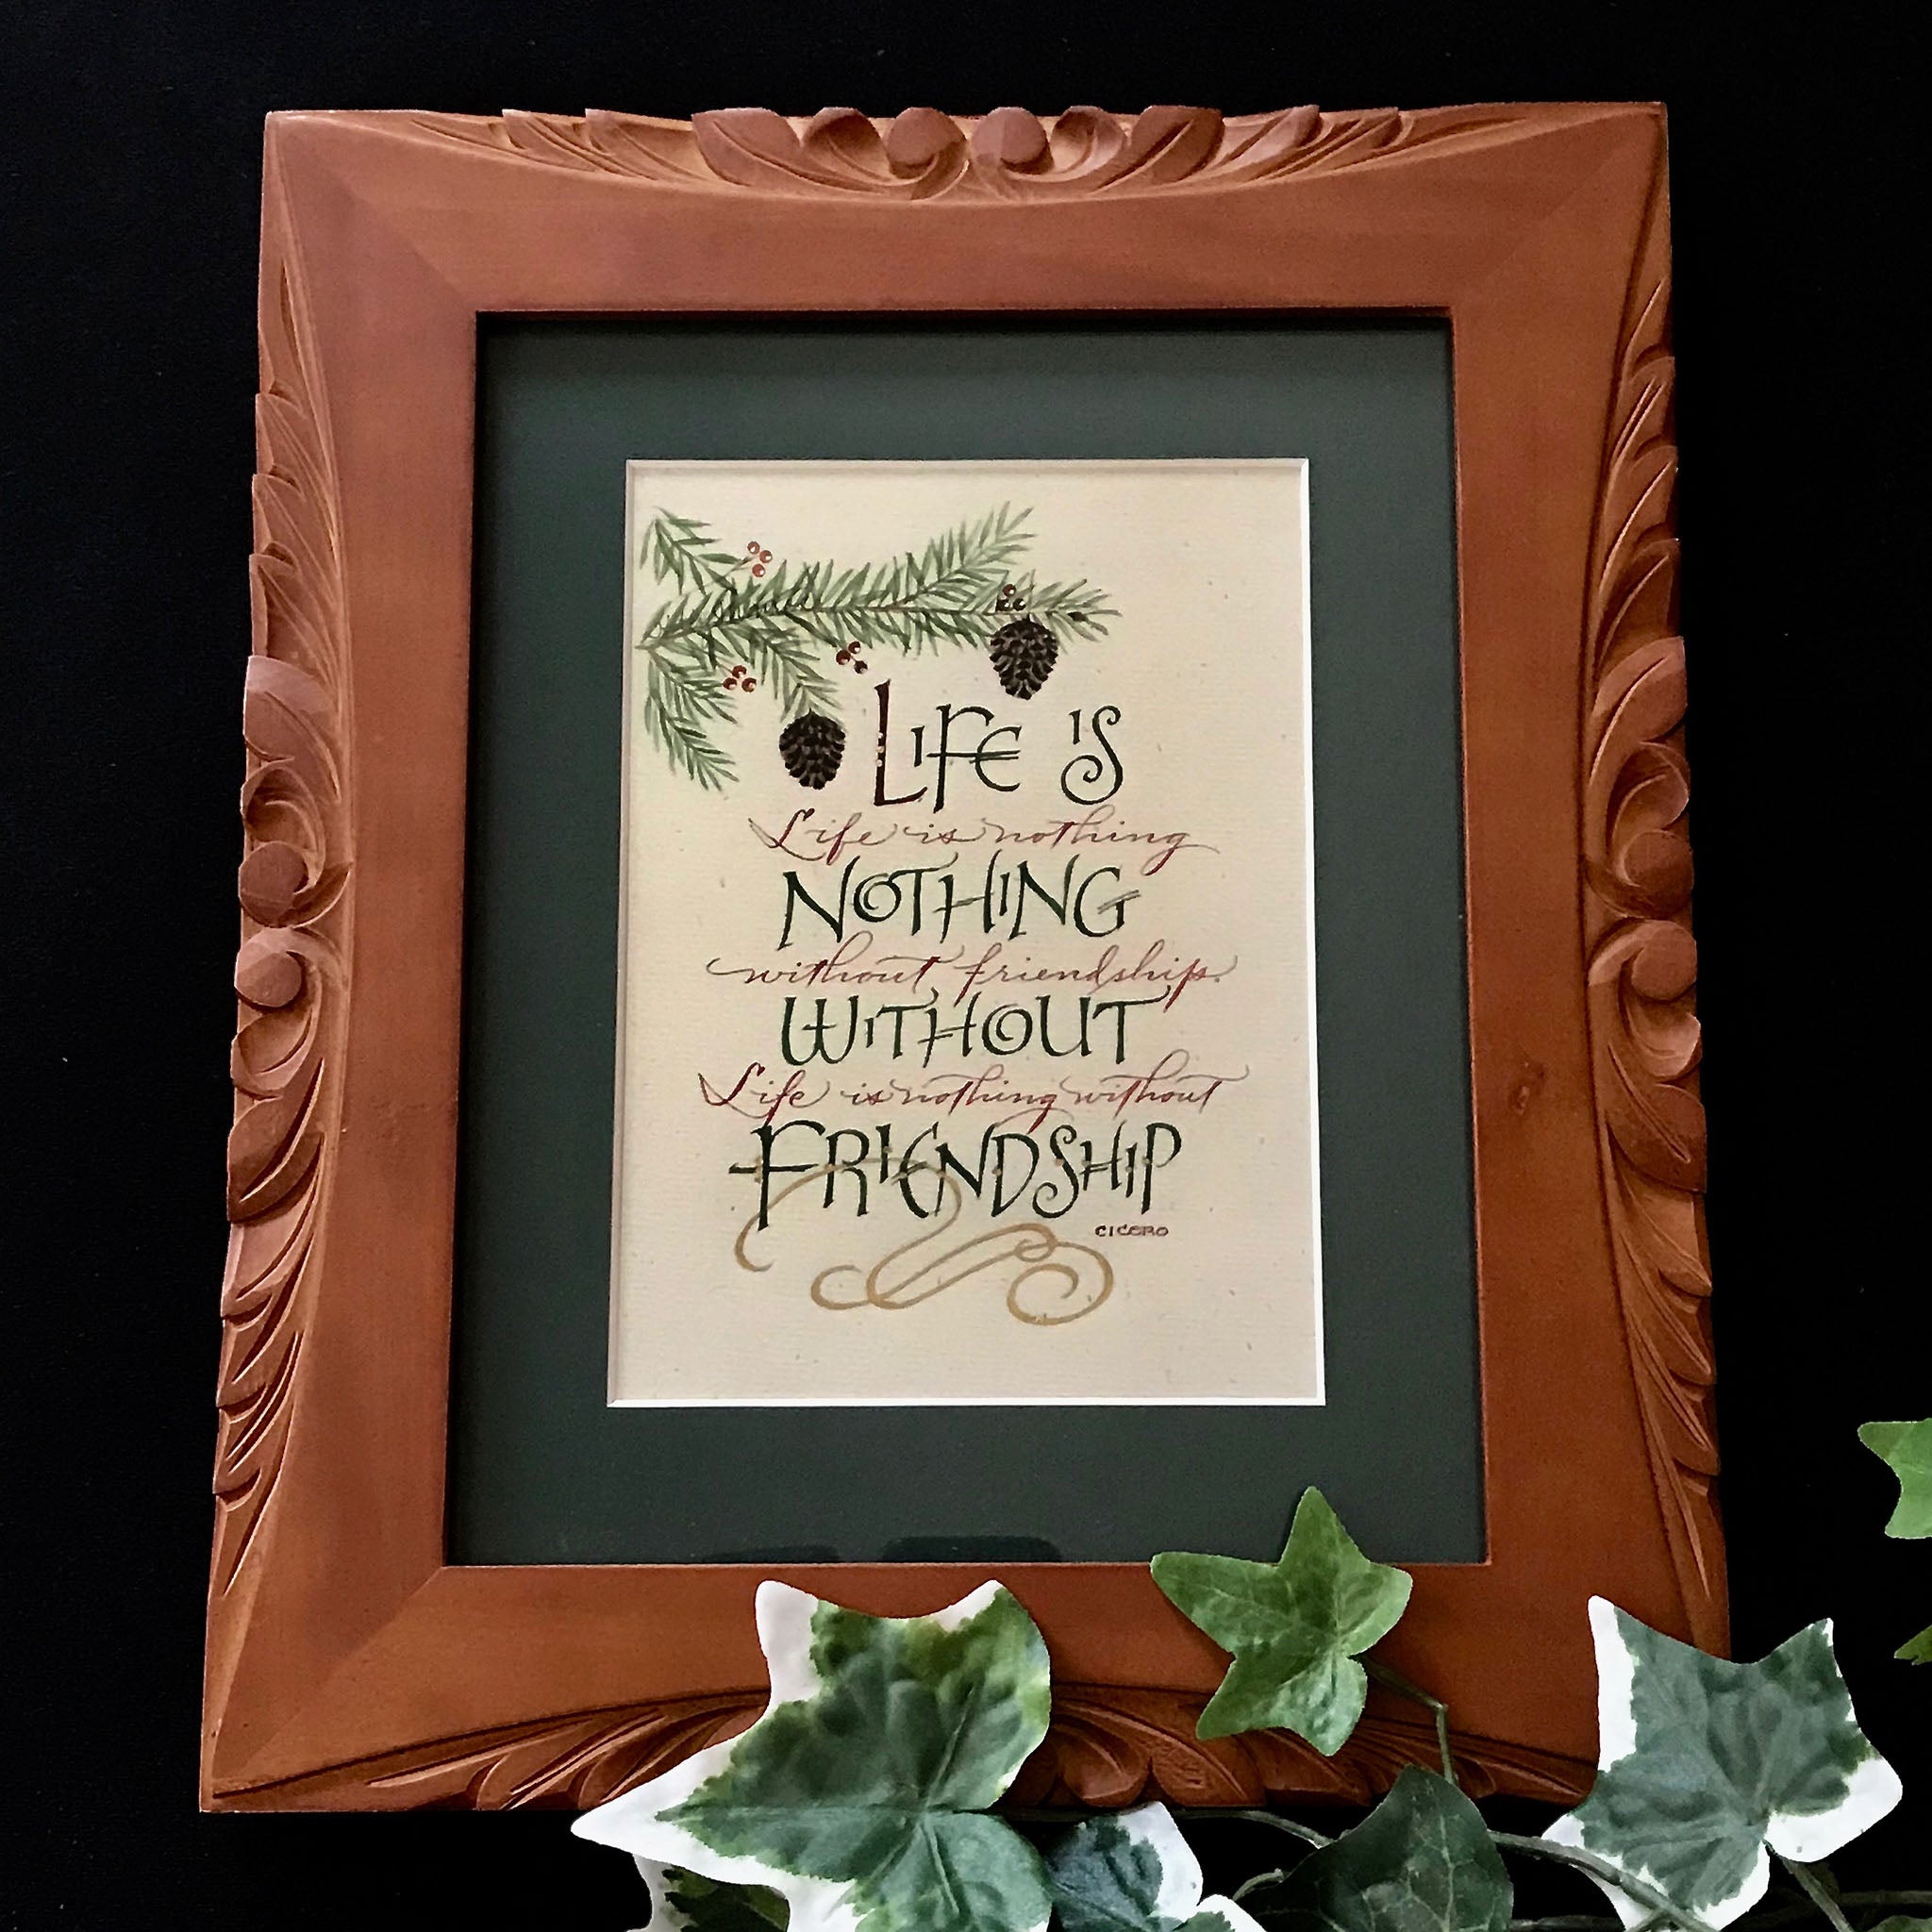 Life is nothing without friendship Cicero - Holly Monroe Calligrapher